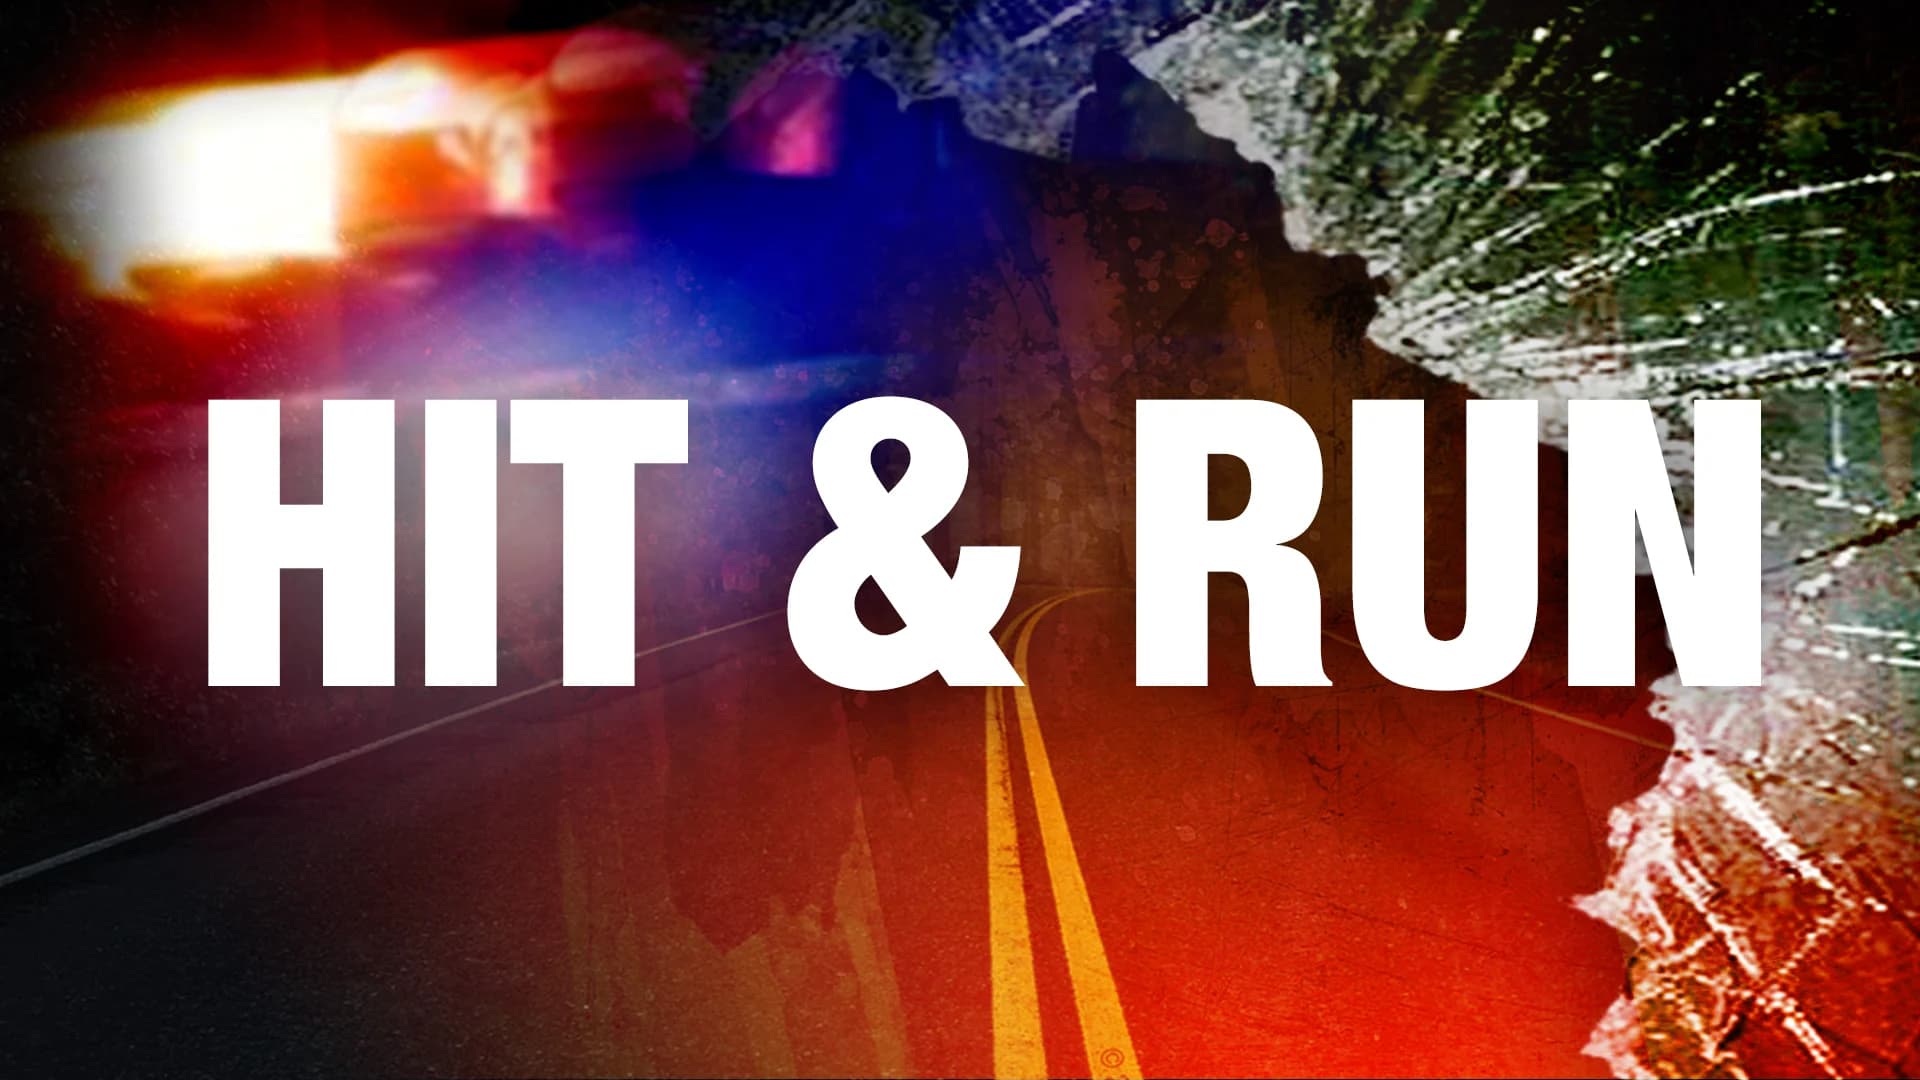 Investigators seek information in deadly hit-and-run in Clifton